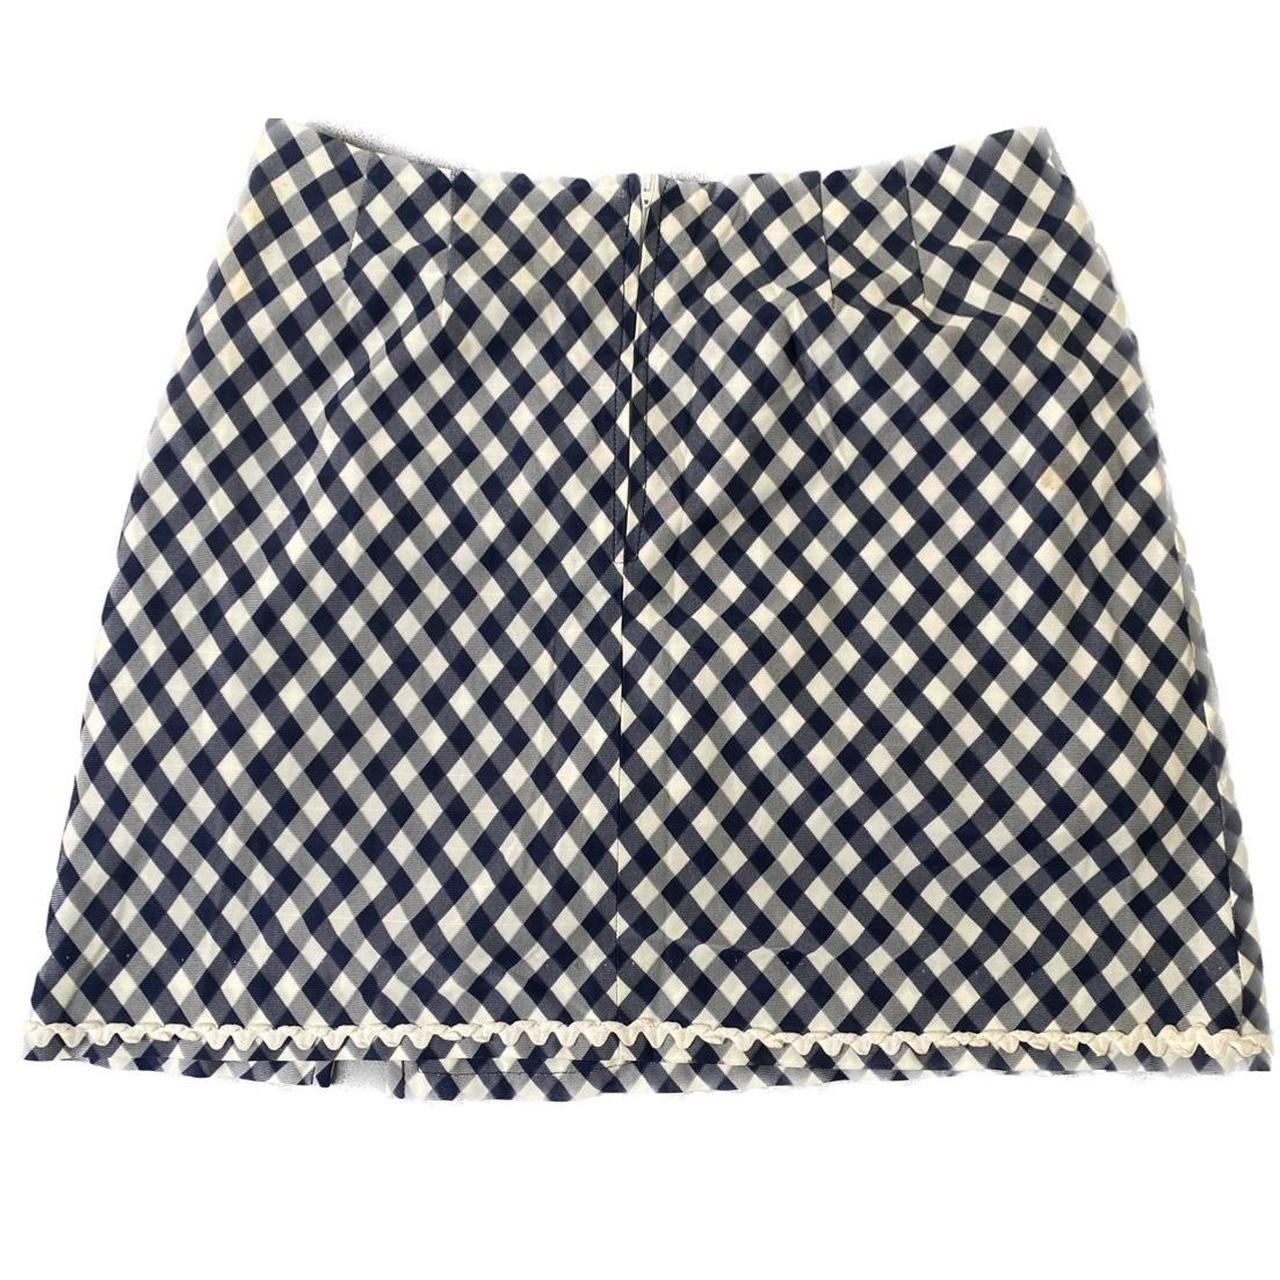 American Vintage Women's Navy and White Skirt (3)